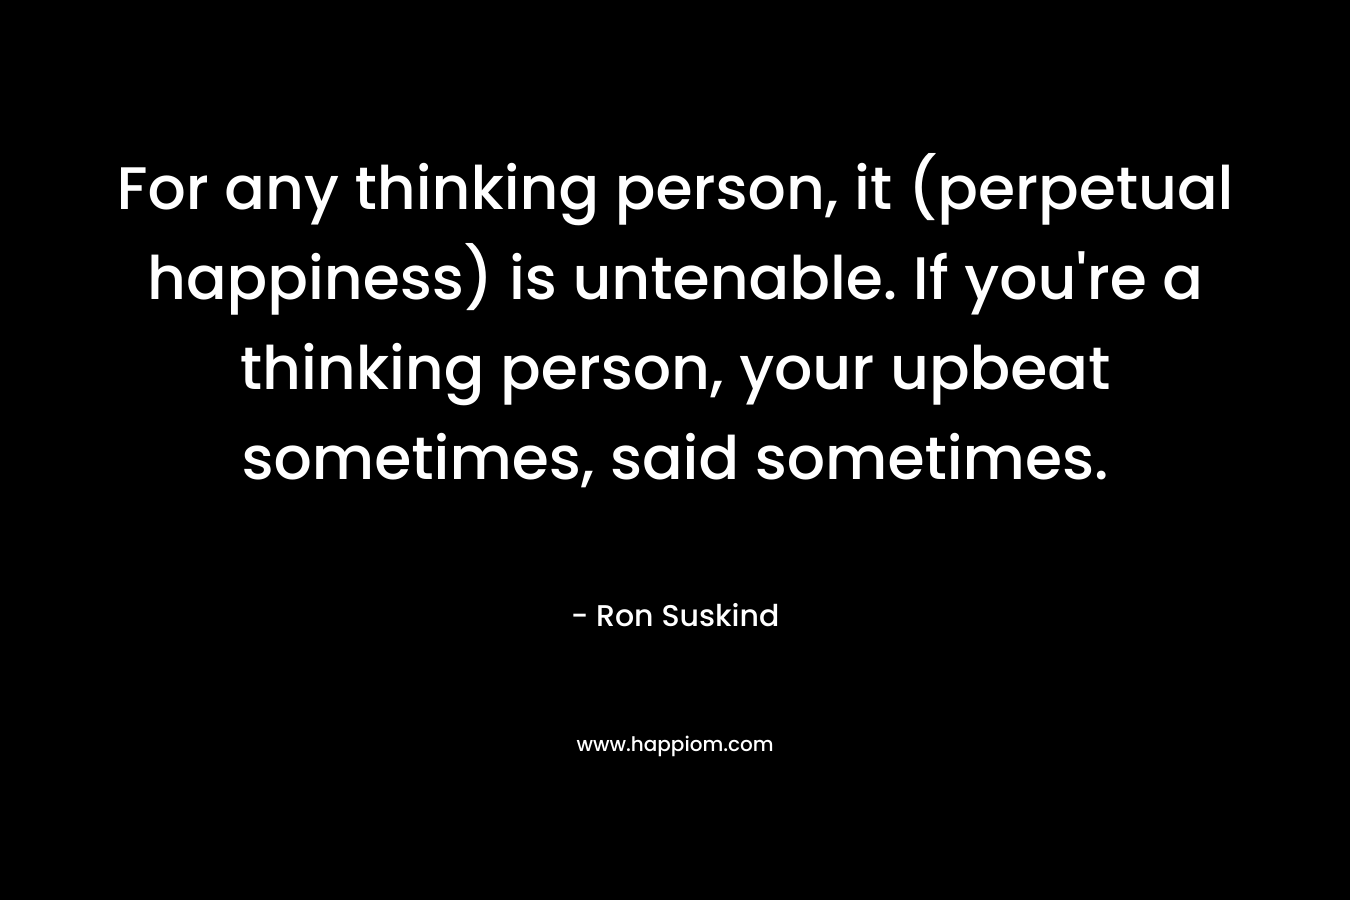 For any thinking person, it (perpetual happiness) is untenable. If you're a thinking person, your upbeat sometimes, said sometimes.